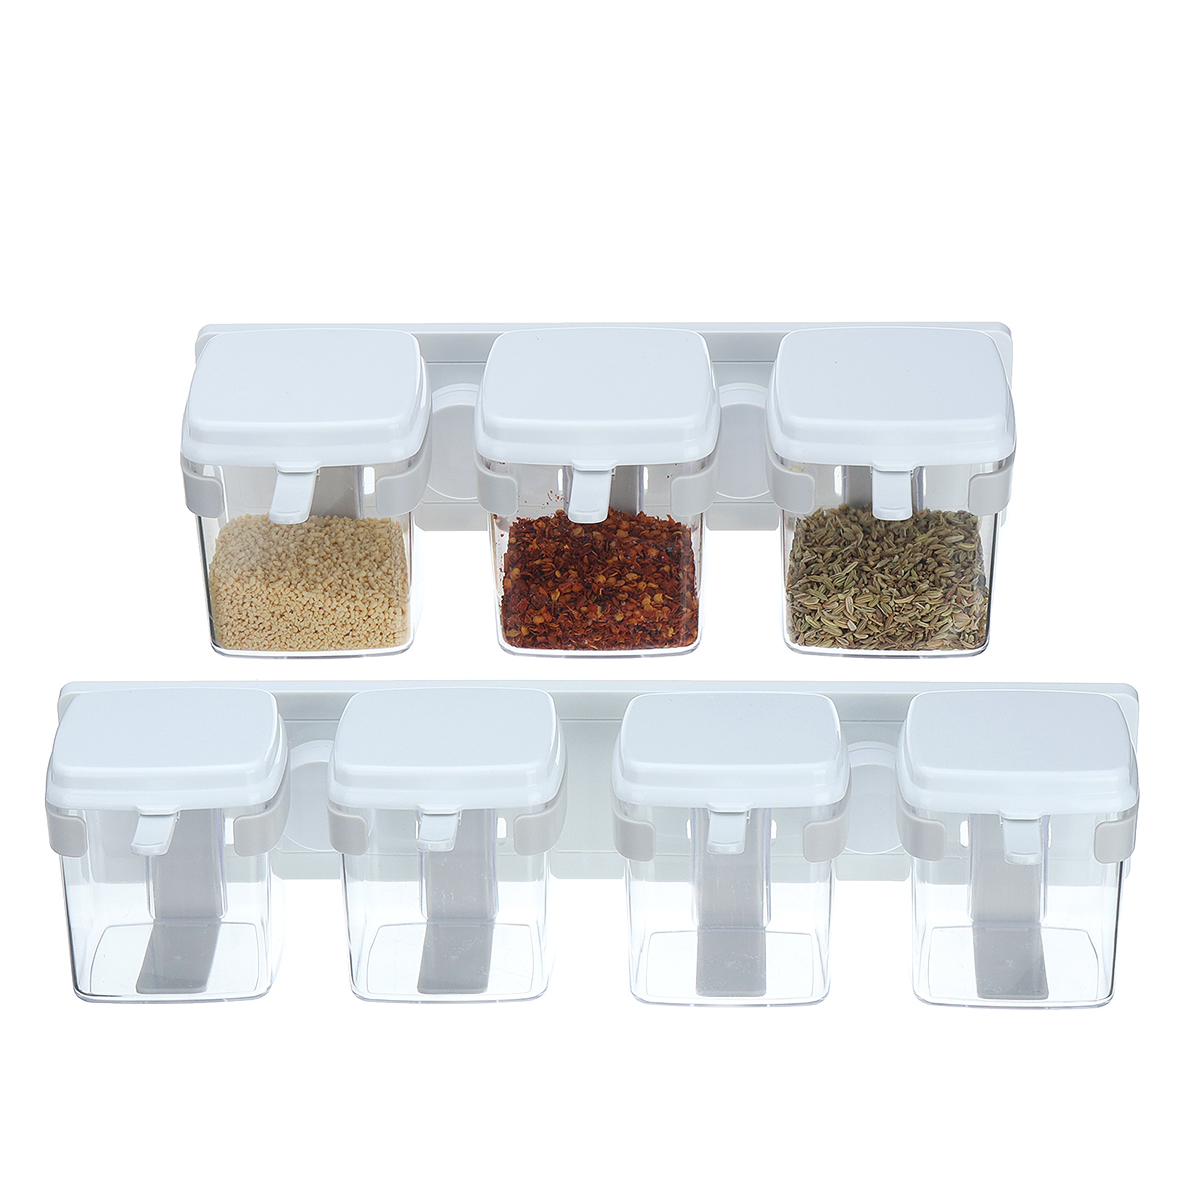 34-Grids-Seasoning-Storage-Container-Kitchen-Wall-Hanging-Condiment-Spice-Holder-1631502-4